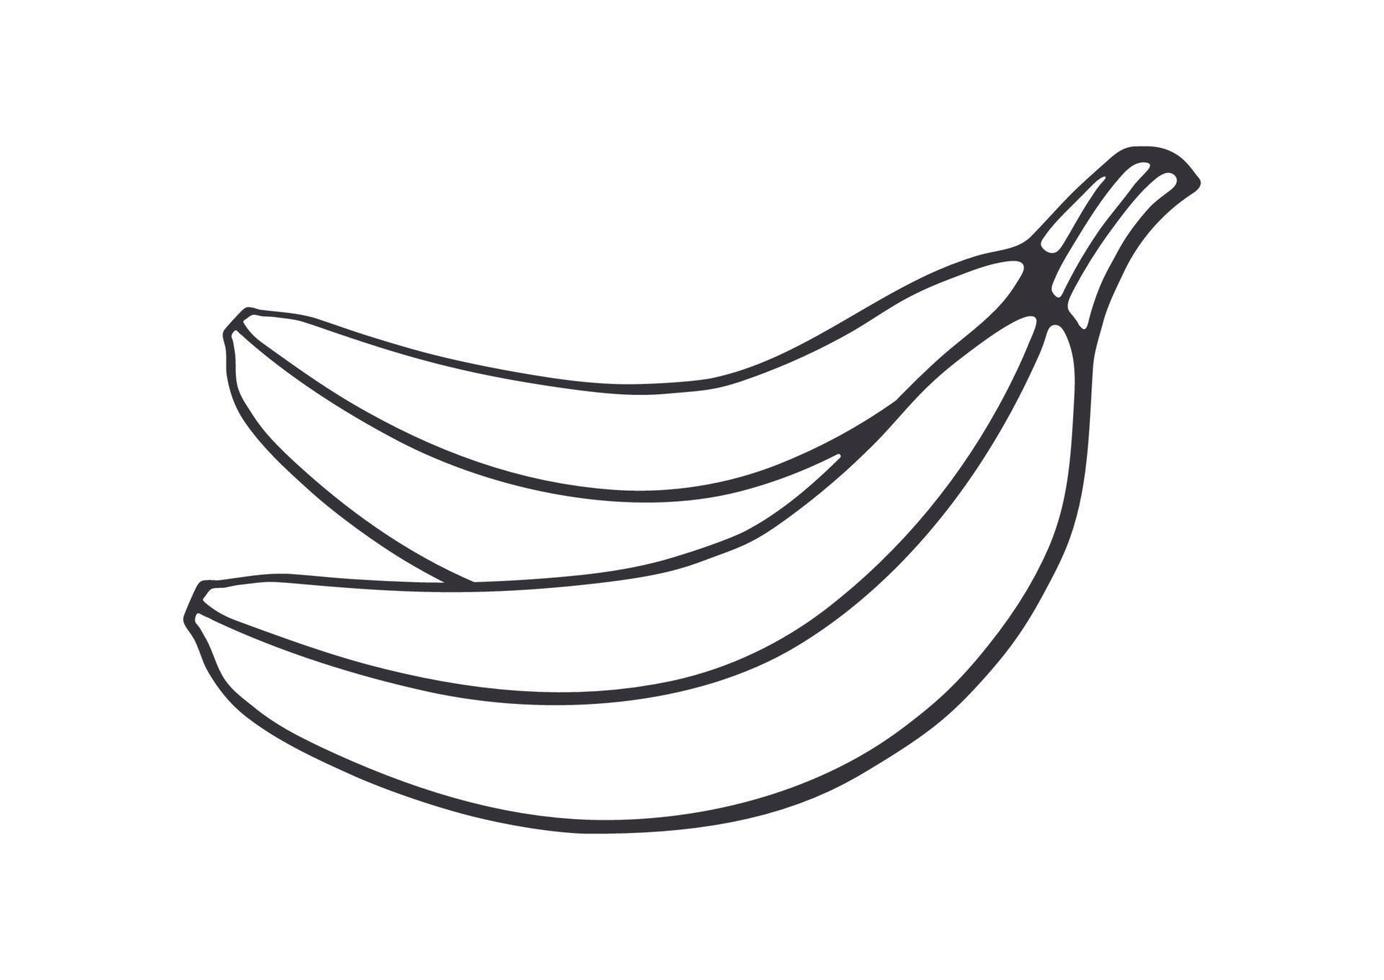 Outline doodle of two bananas vector